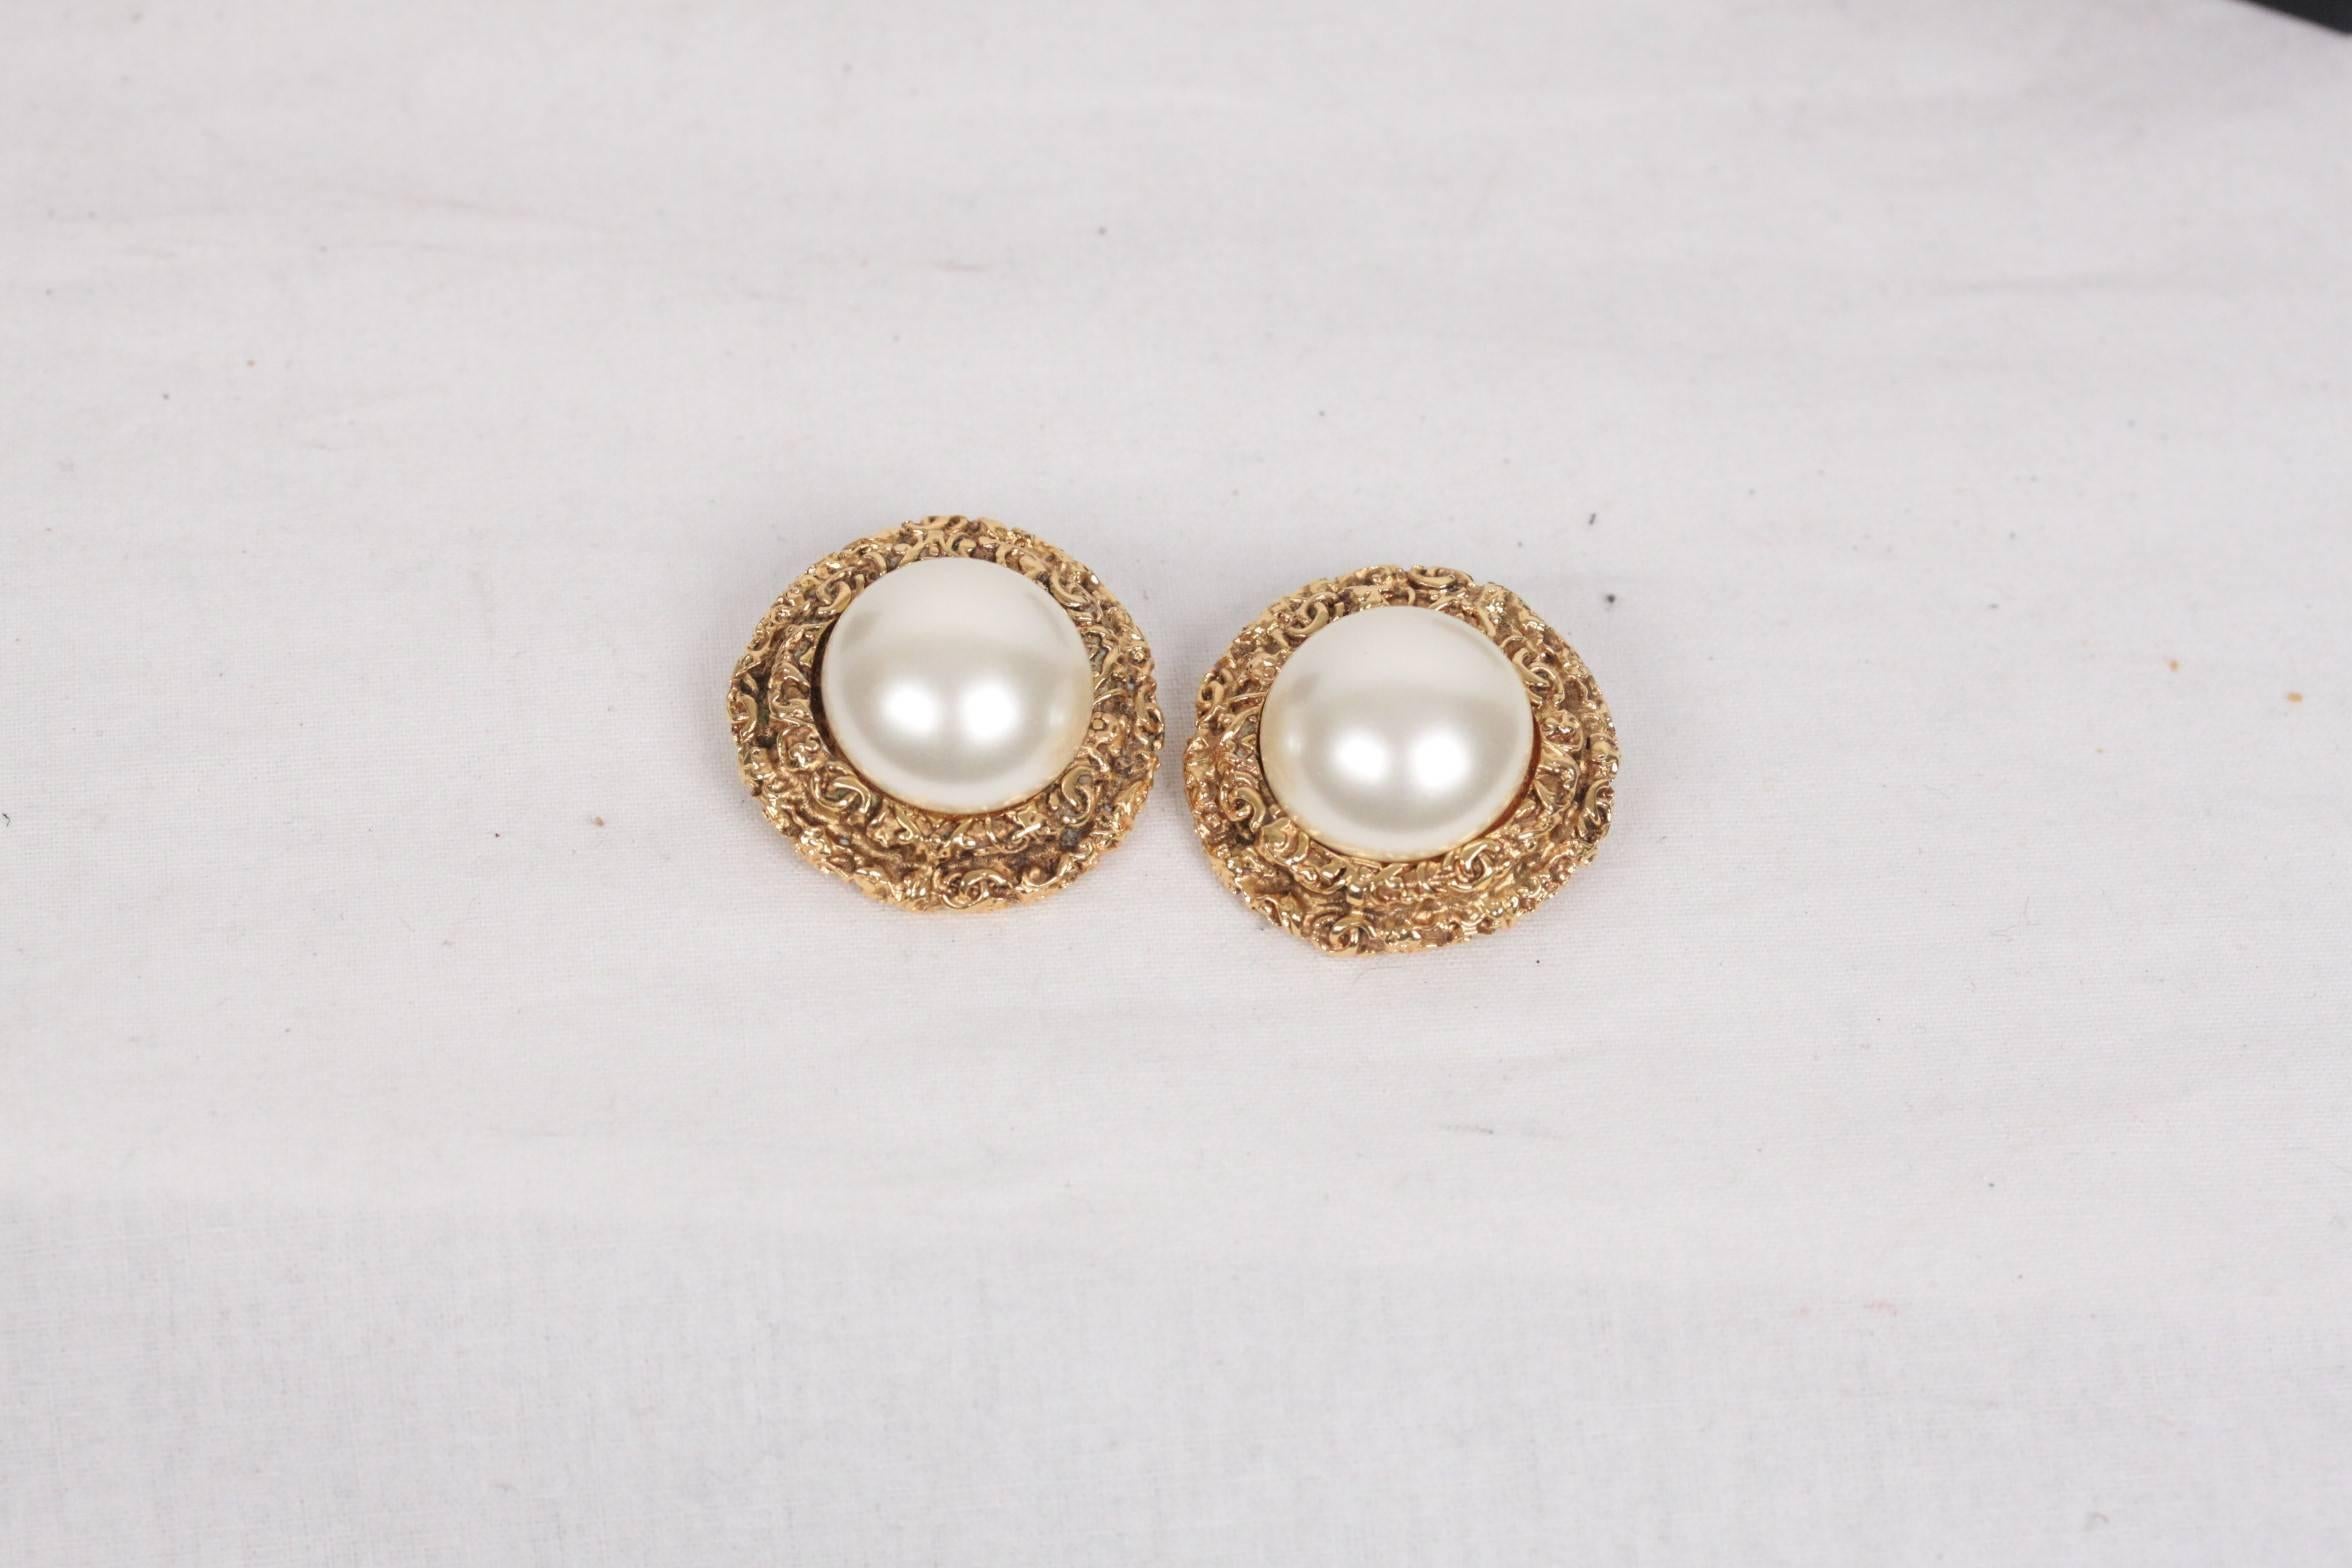 - Gorgeous vintage CHANEL earrings 
- Faux Pearl and gold metal bezel with embossed small CC Logos 
- Clip-on earrings
- Signed ' C CHANEL R - 93 CC A - MADE IN FRANCE' in a oval mark. 
- Diameter: 1 1/4 inches - 3,2 cm 
- Comes with original CHANEL